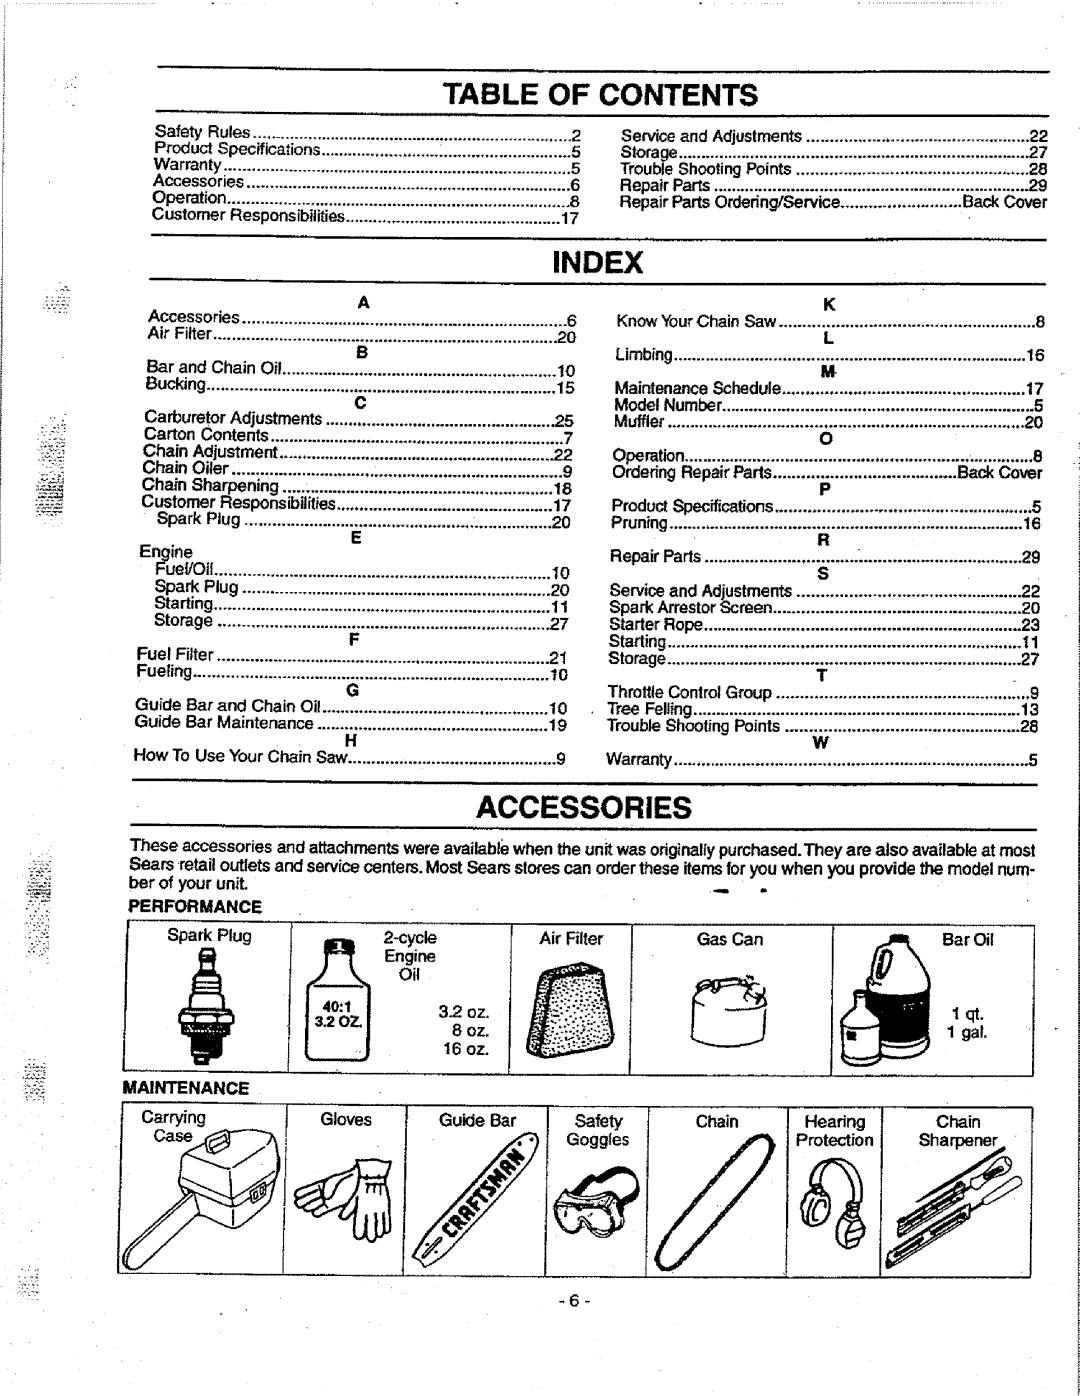 Craftsman 358.351080 manual Accessories, Table Of Contents, Index 